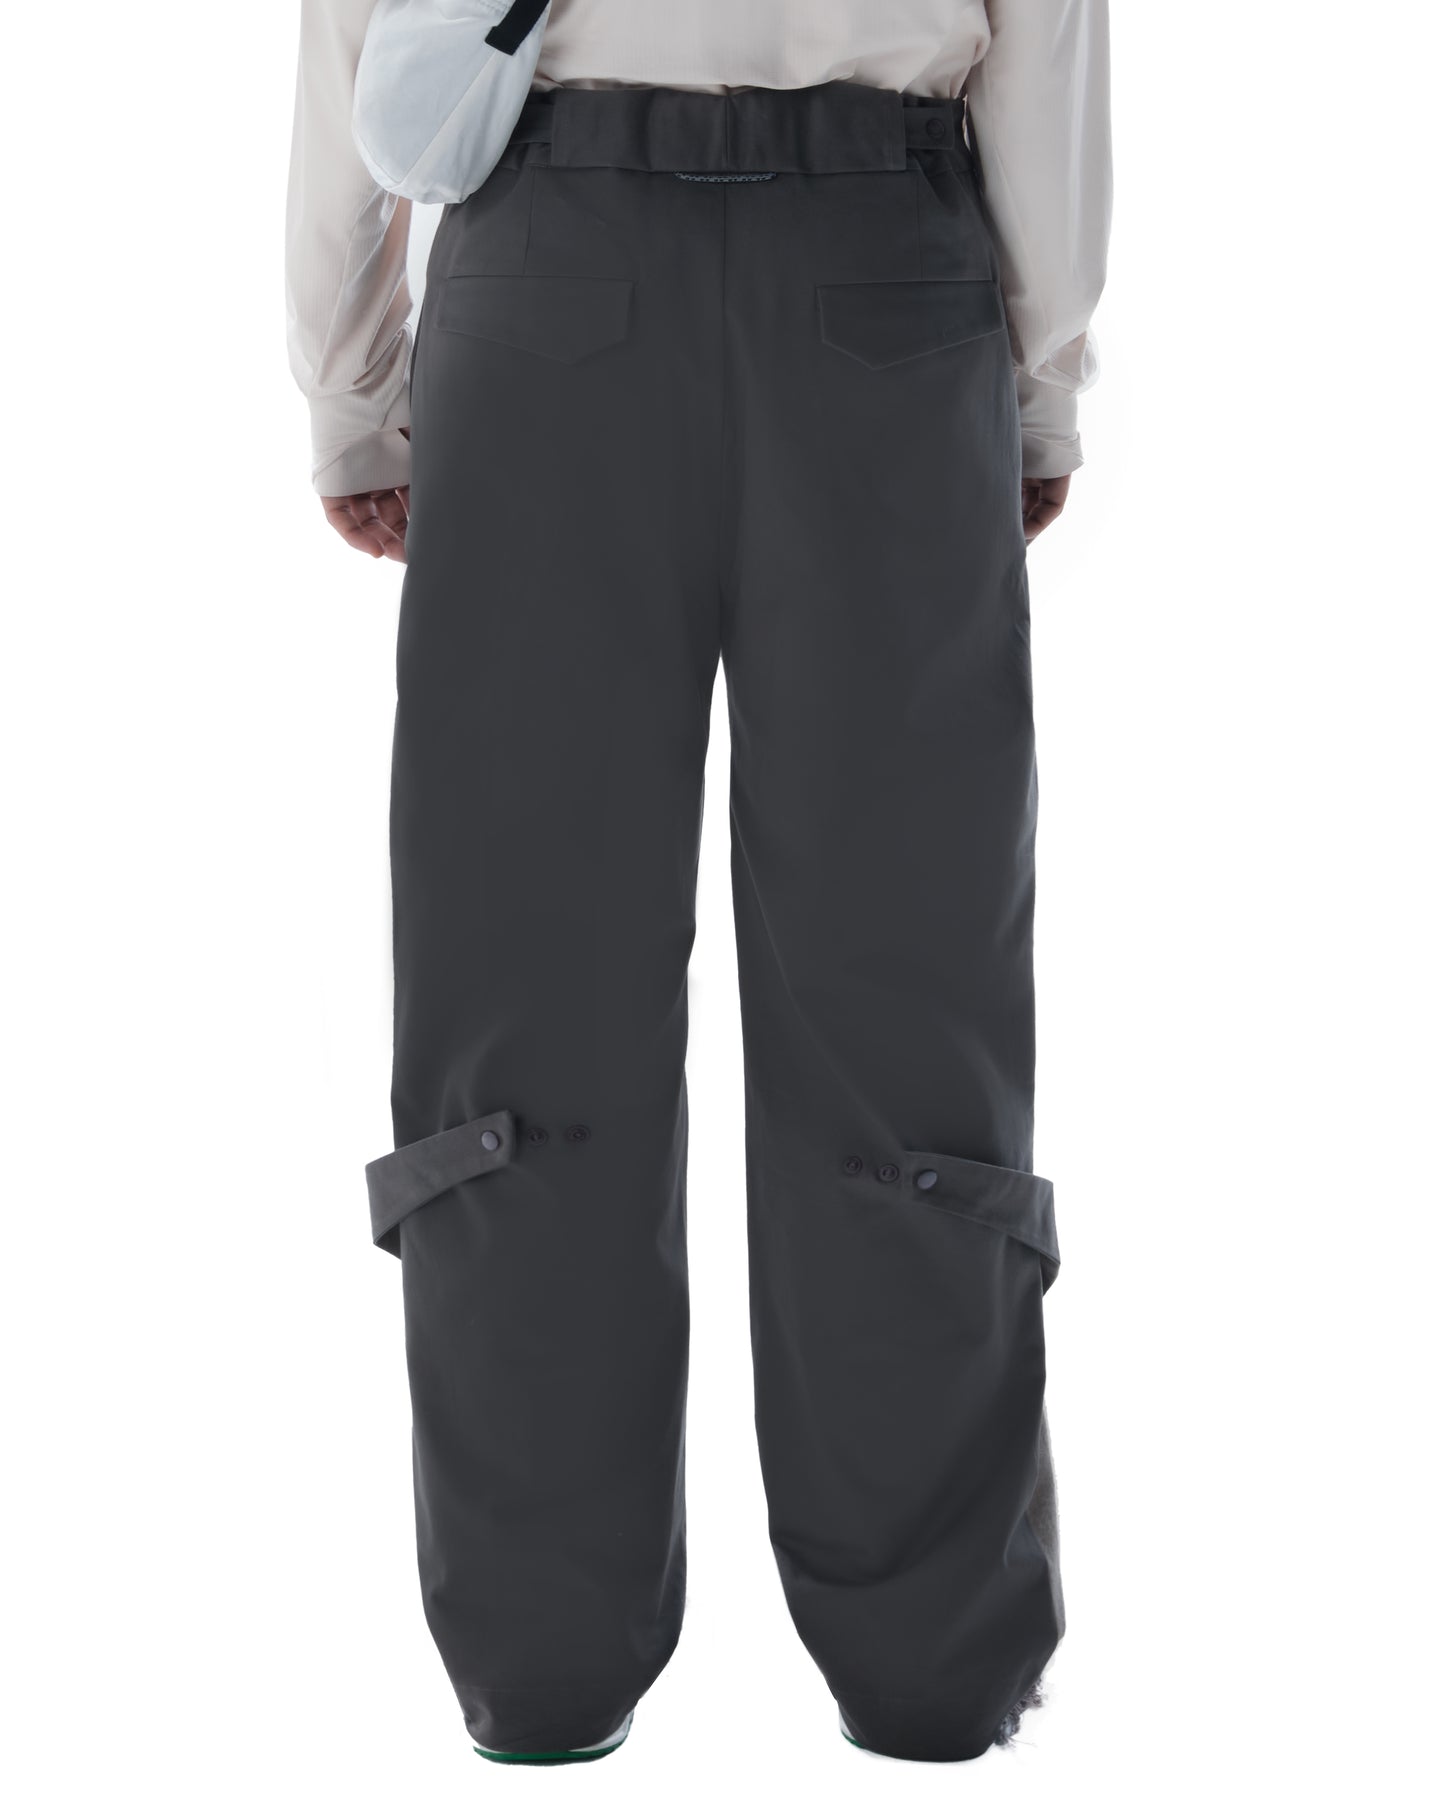 ASKEW TAILORED GREY TROUSERS